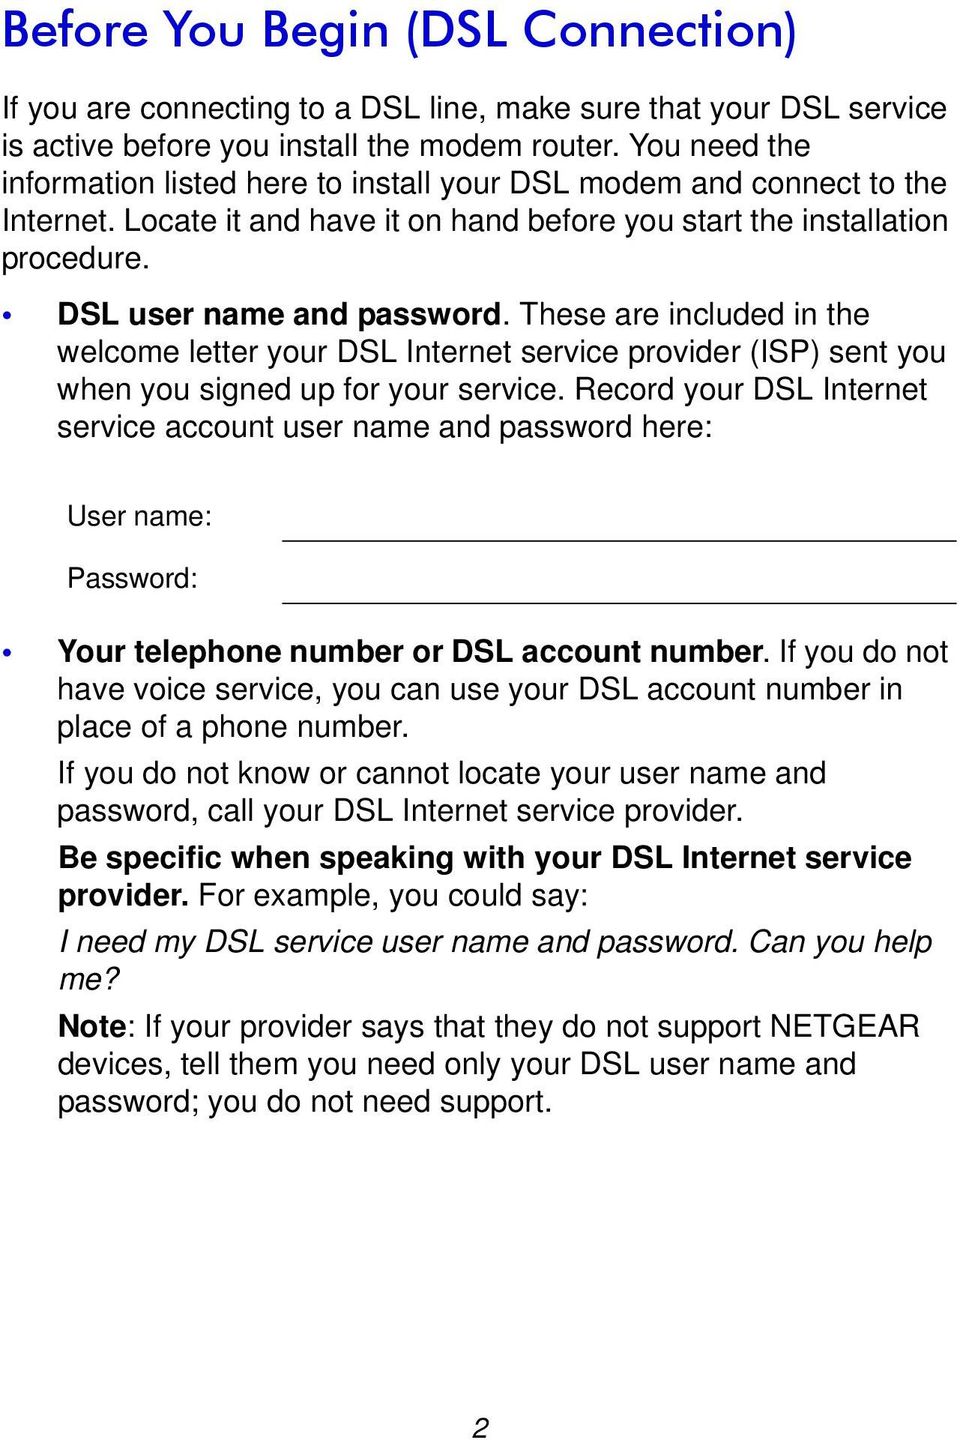 These are included in the welcome letter your DSL Internet service provider (ISP) sent you when you signed up for your service.